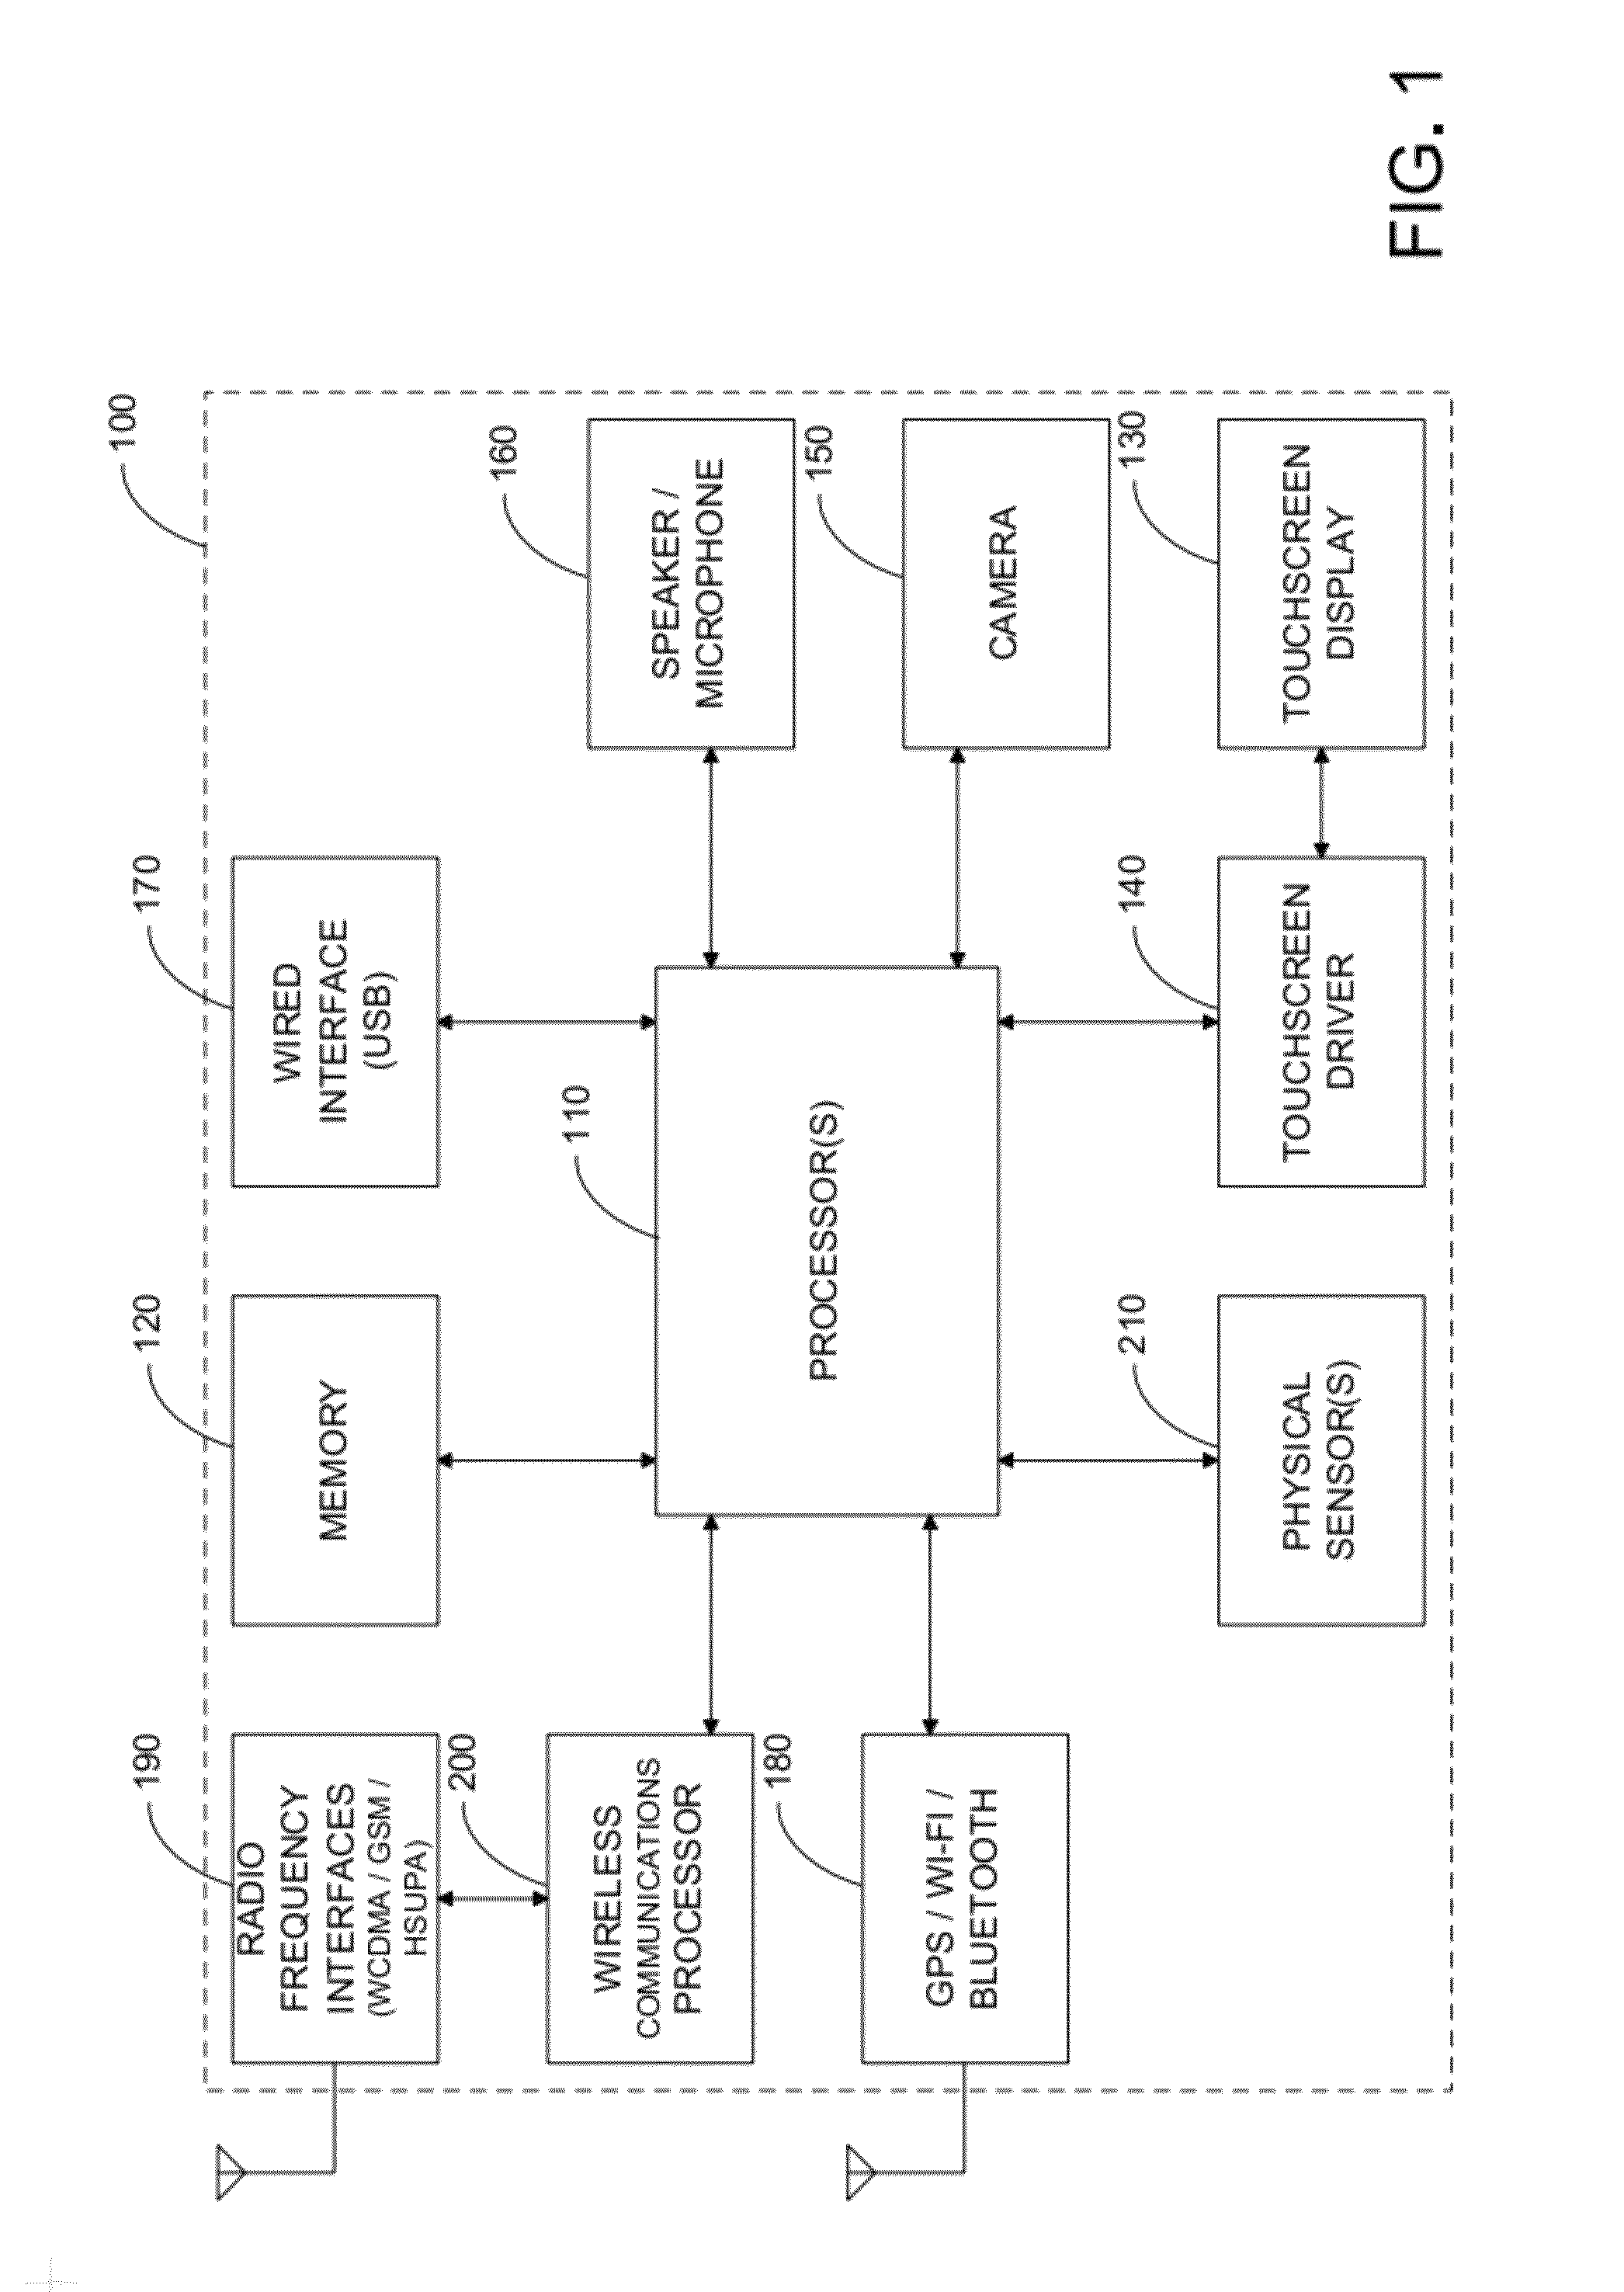 Methods and apparatus for capturing magnetic credit card data on a hand held device